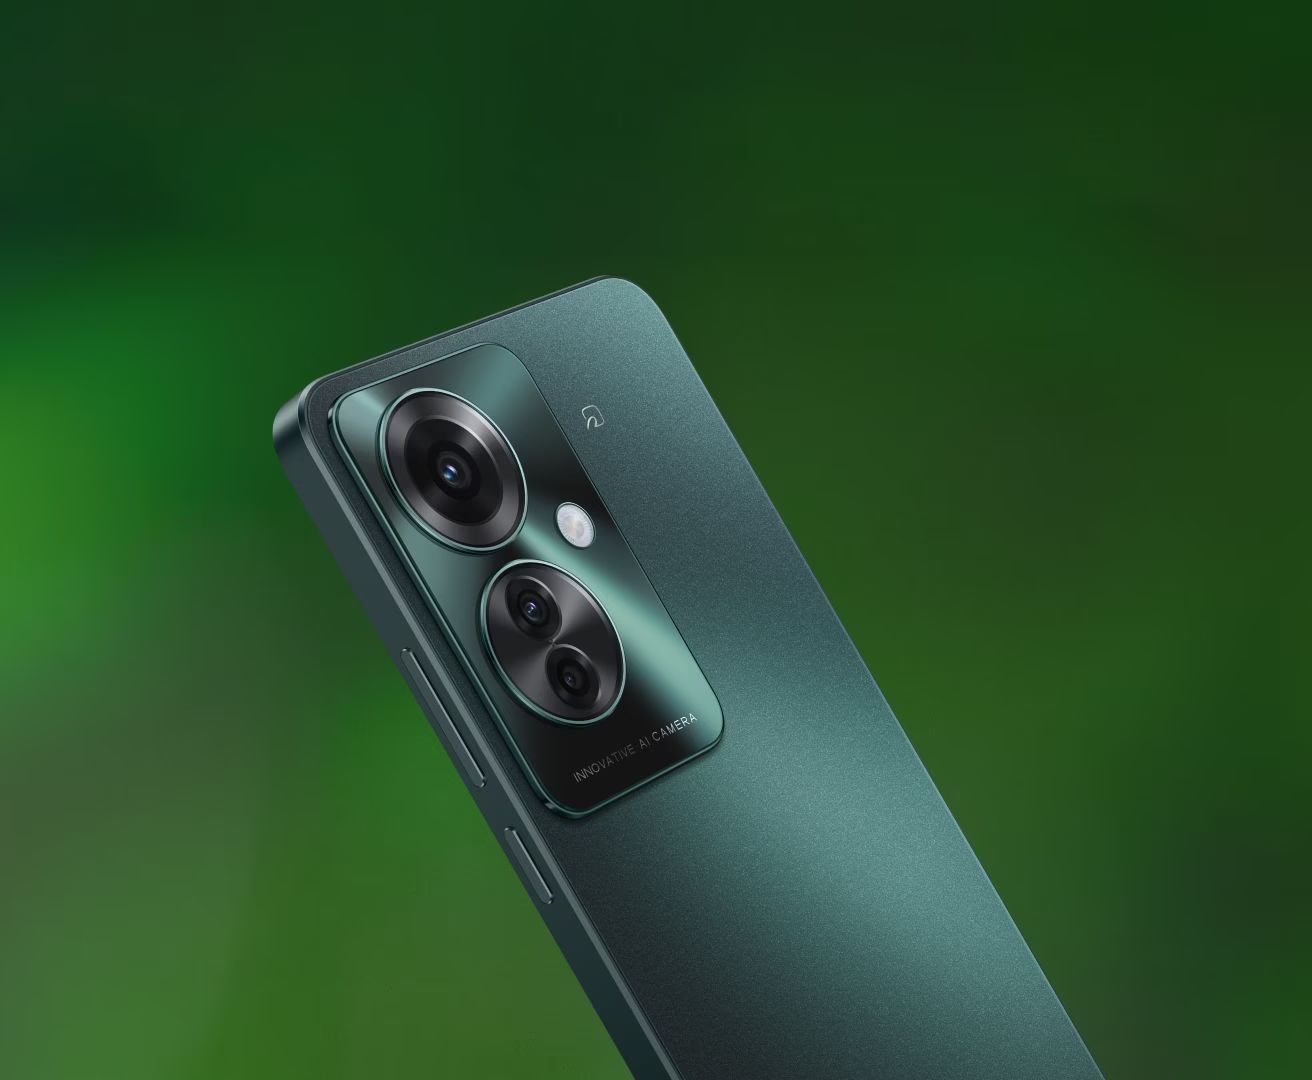 Oppo Reno 11A can be purchased starting at JPY 48,800 (~$307) for the 8/128GB